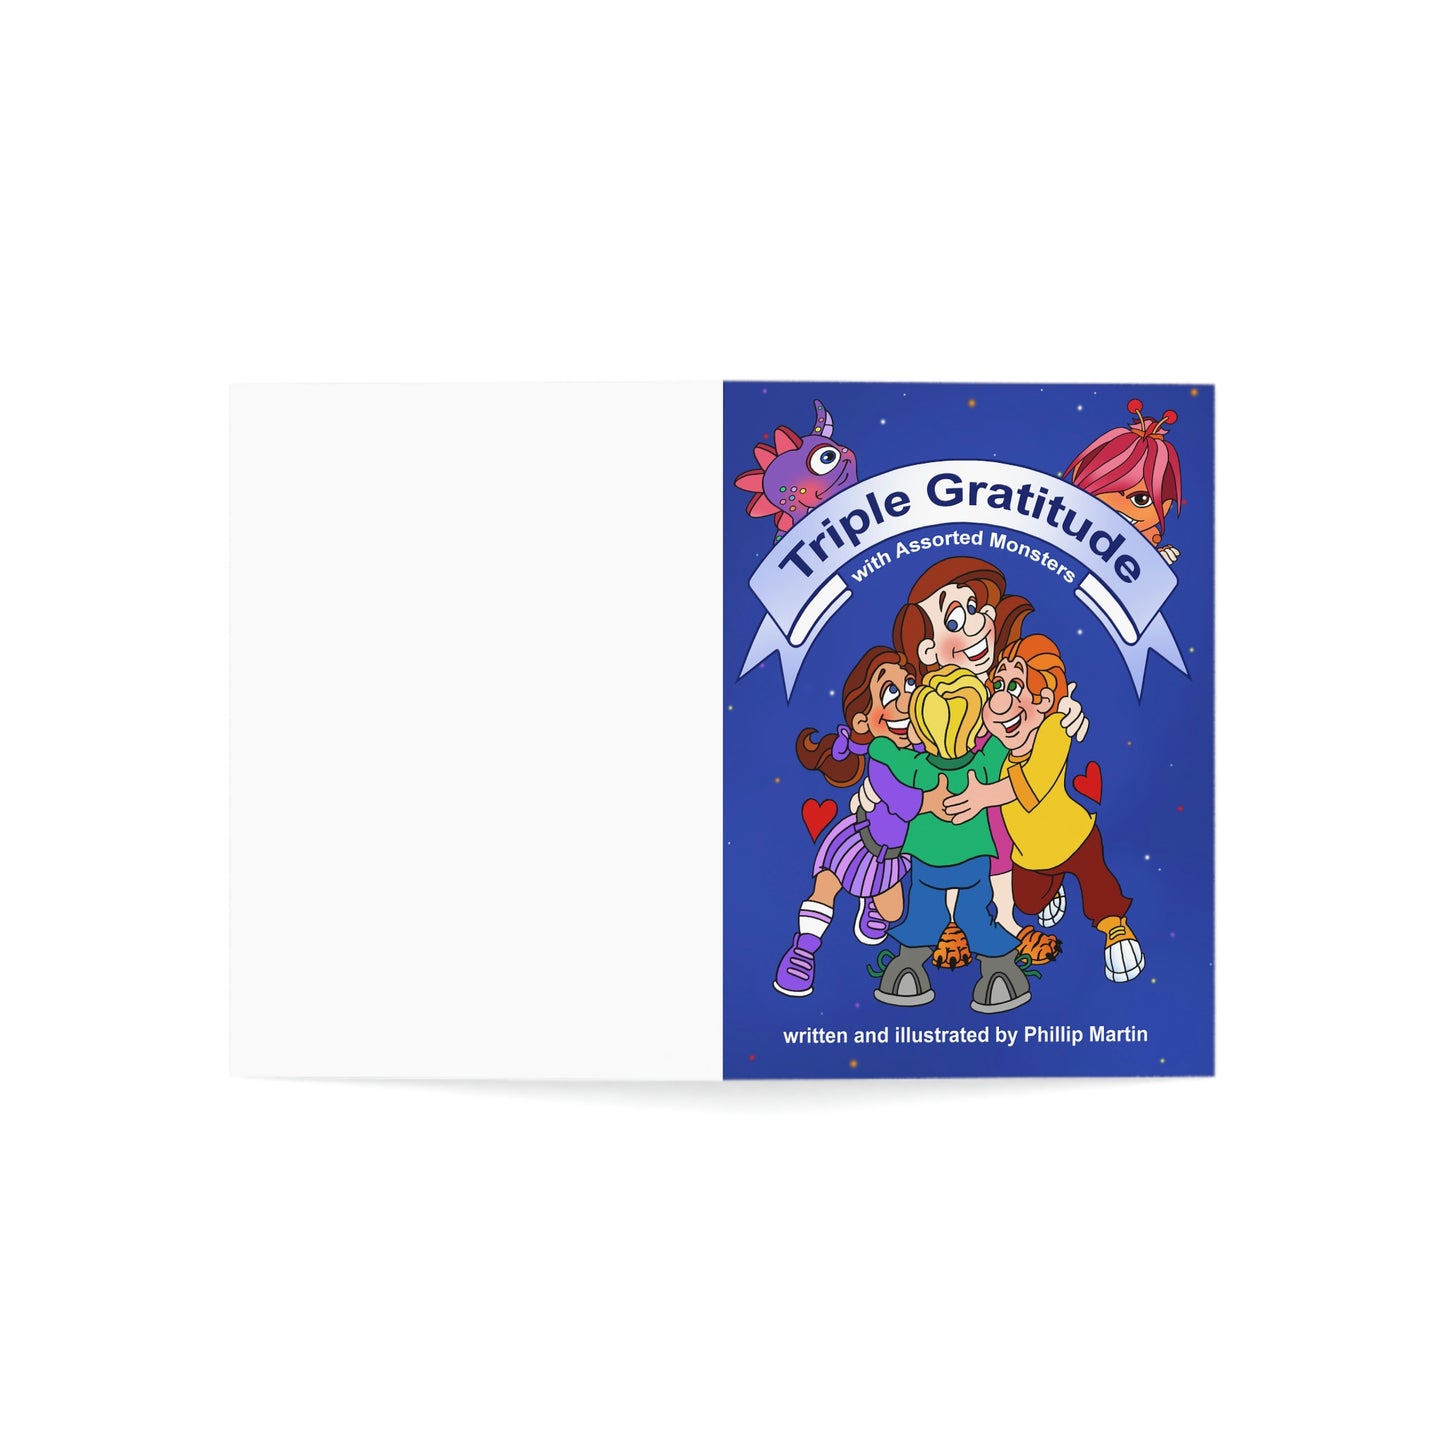 Triple Gratitude with Assorted Monsters Greeting Cards (1, 10, 30, and 50pcs)